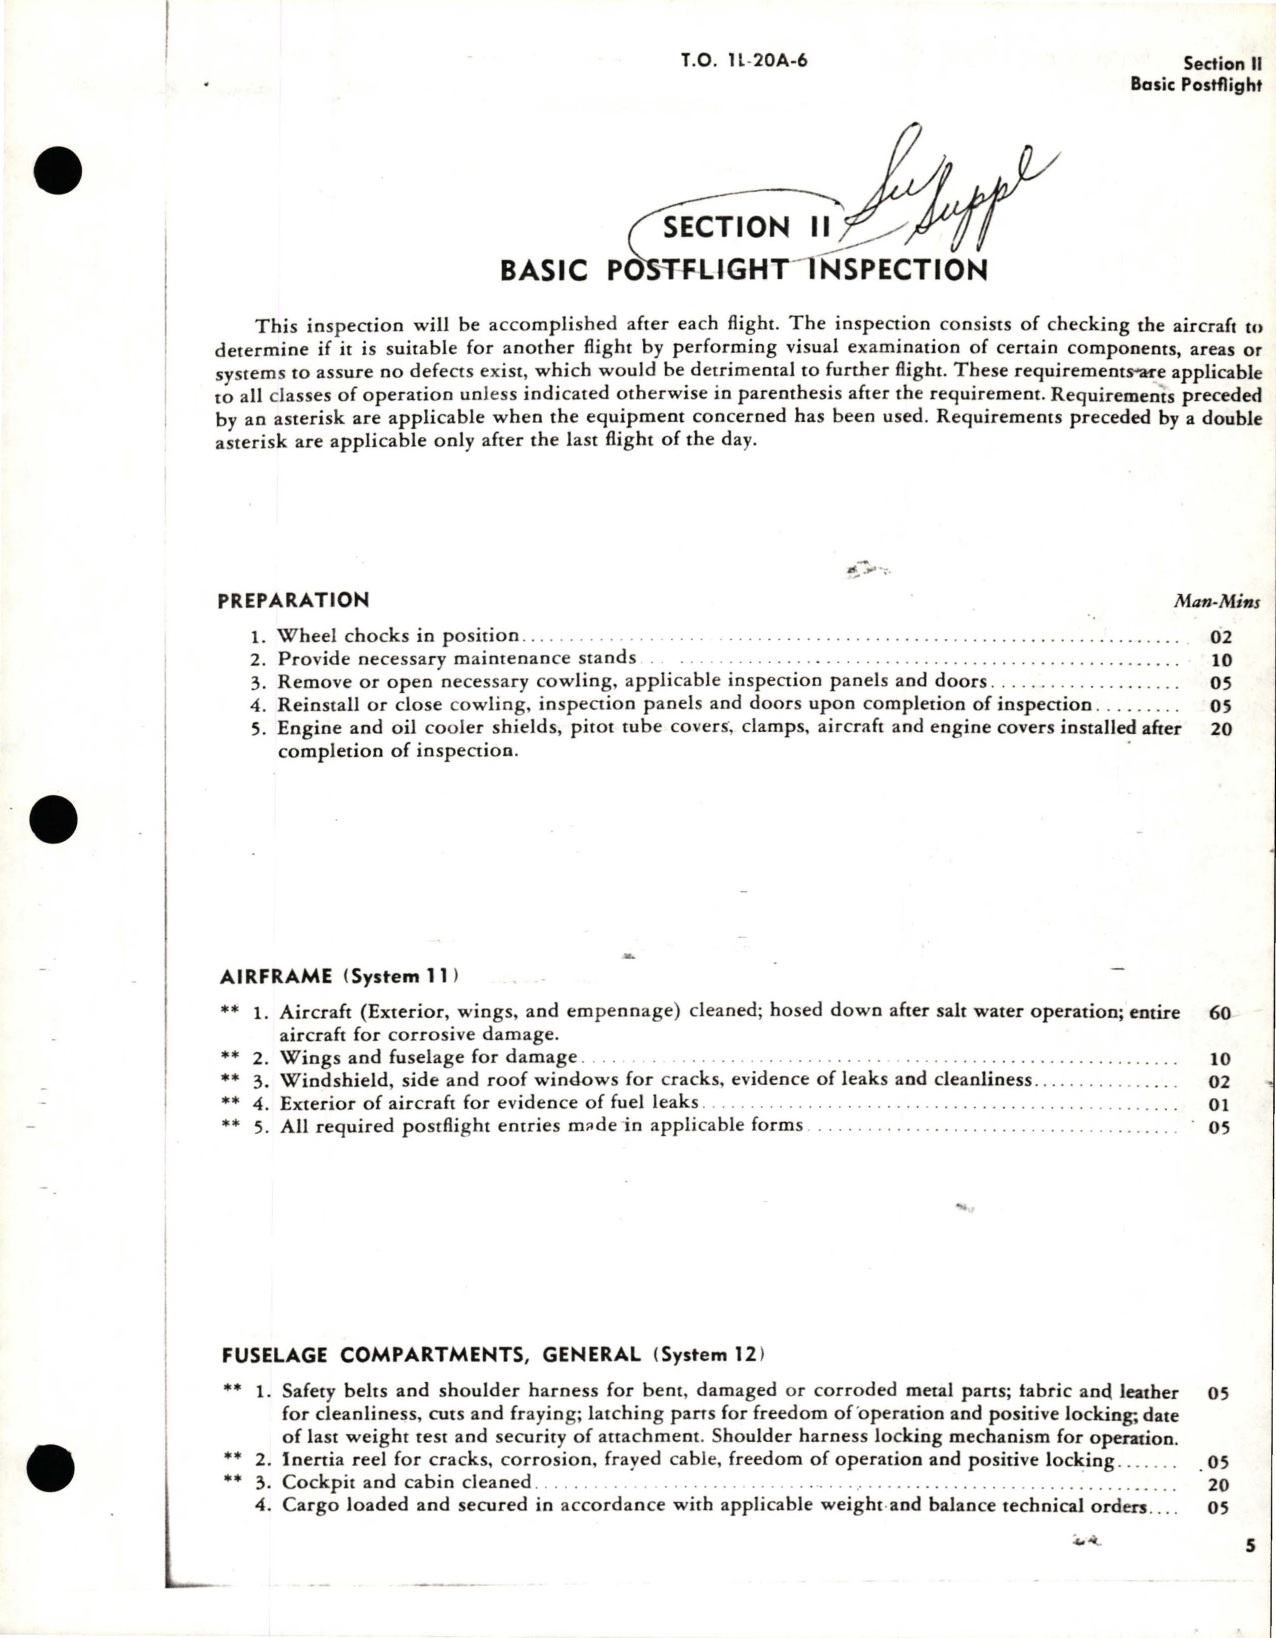 Sample page 9 from AirCorps Library document: Scheduled Inspection and Maintenance Requirements for L-20A